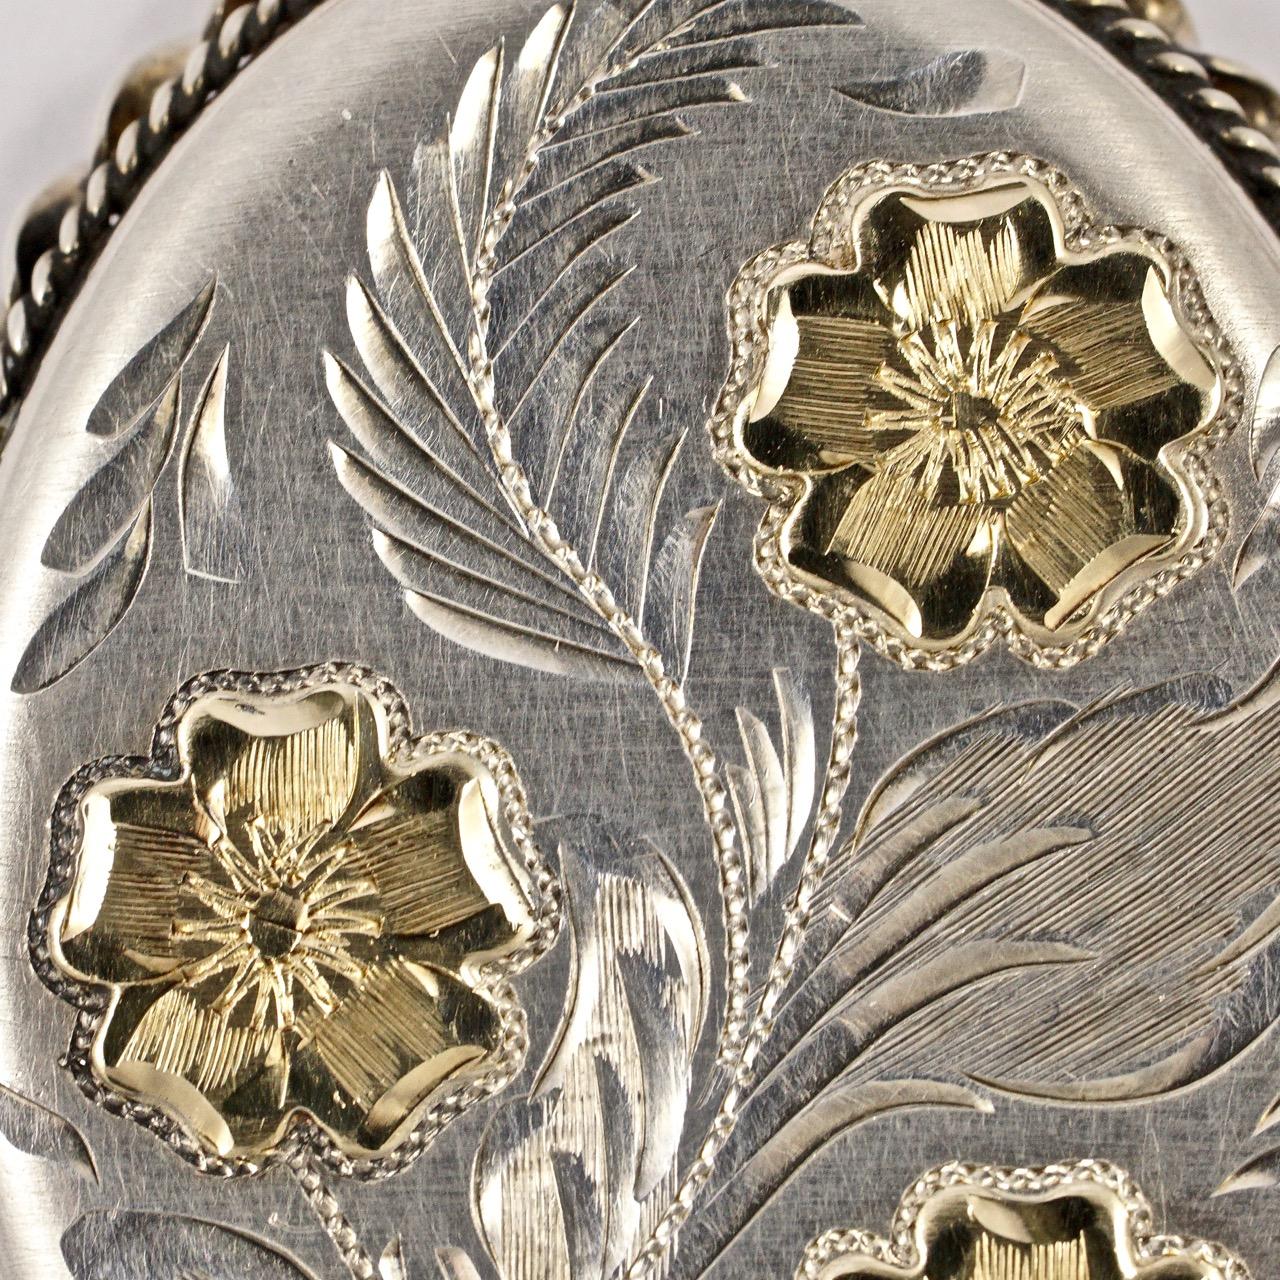 
Sterling silver large locket and chain, featuring a lovely engraved floral design with gold gilded flowers to the front, and an engraved leaves design to the back. The locket is stamped with a lion, an anchor, and the date letter is 'M'. The makers